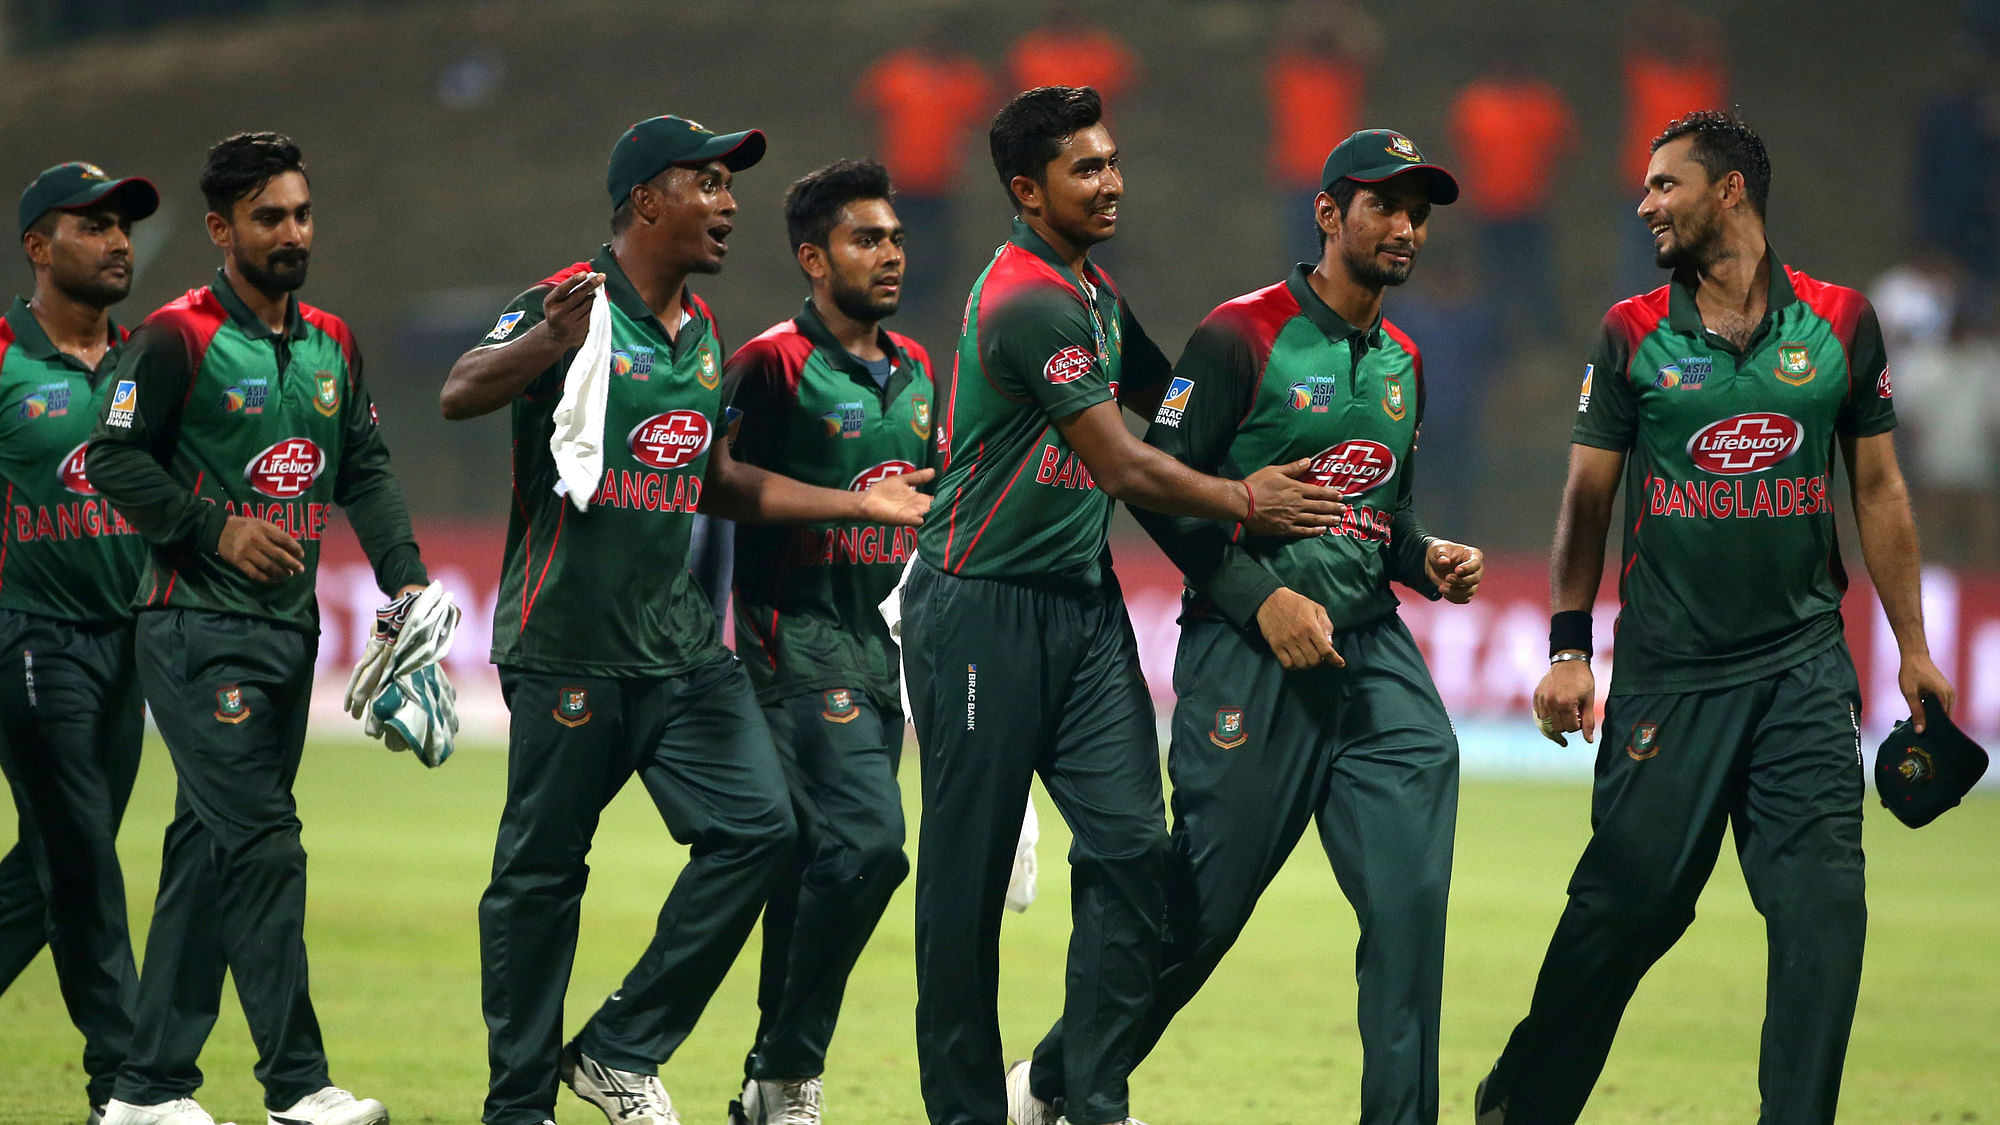 Bangladesh play India in the Asia Cup final on Friday, 28 September.